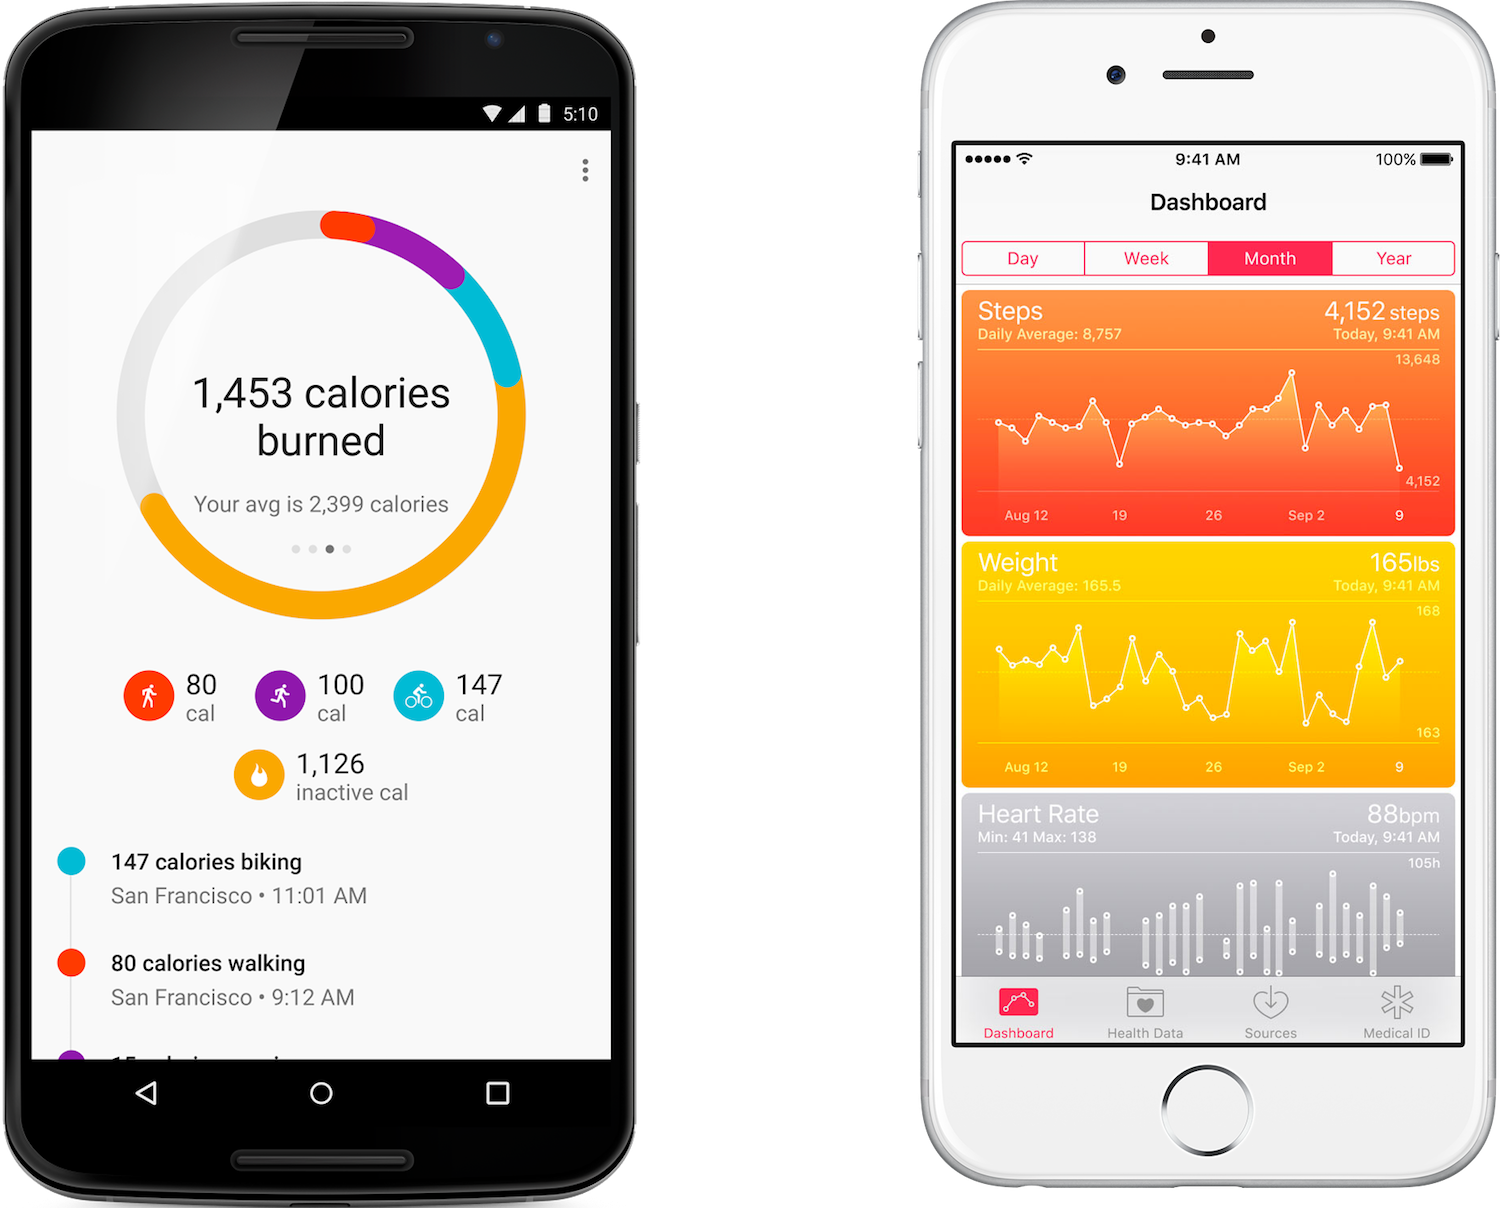 Online fitness tracking tools